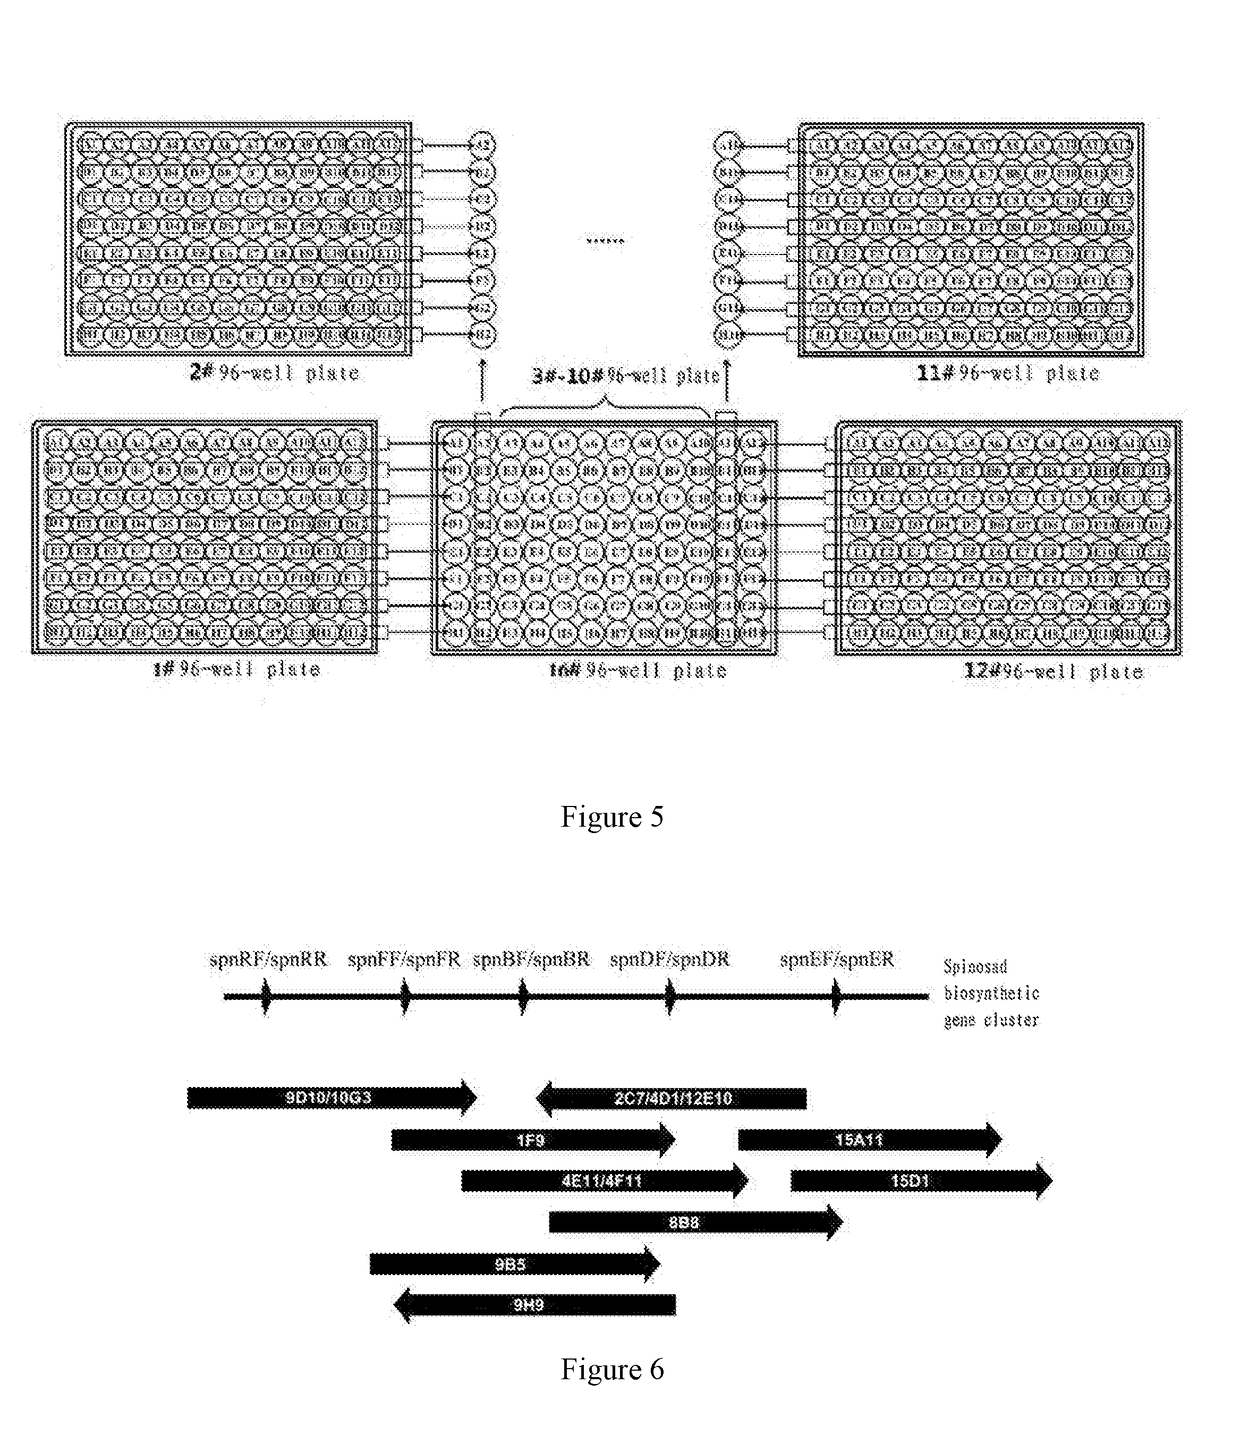 Spinosad heterologous expression strain and construction method thereof and use